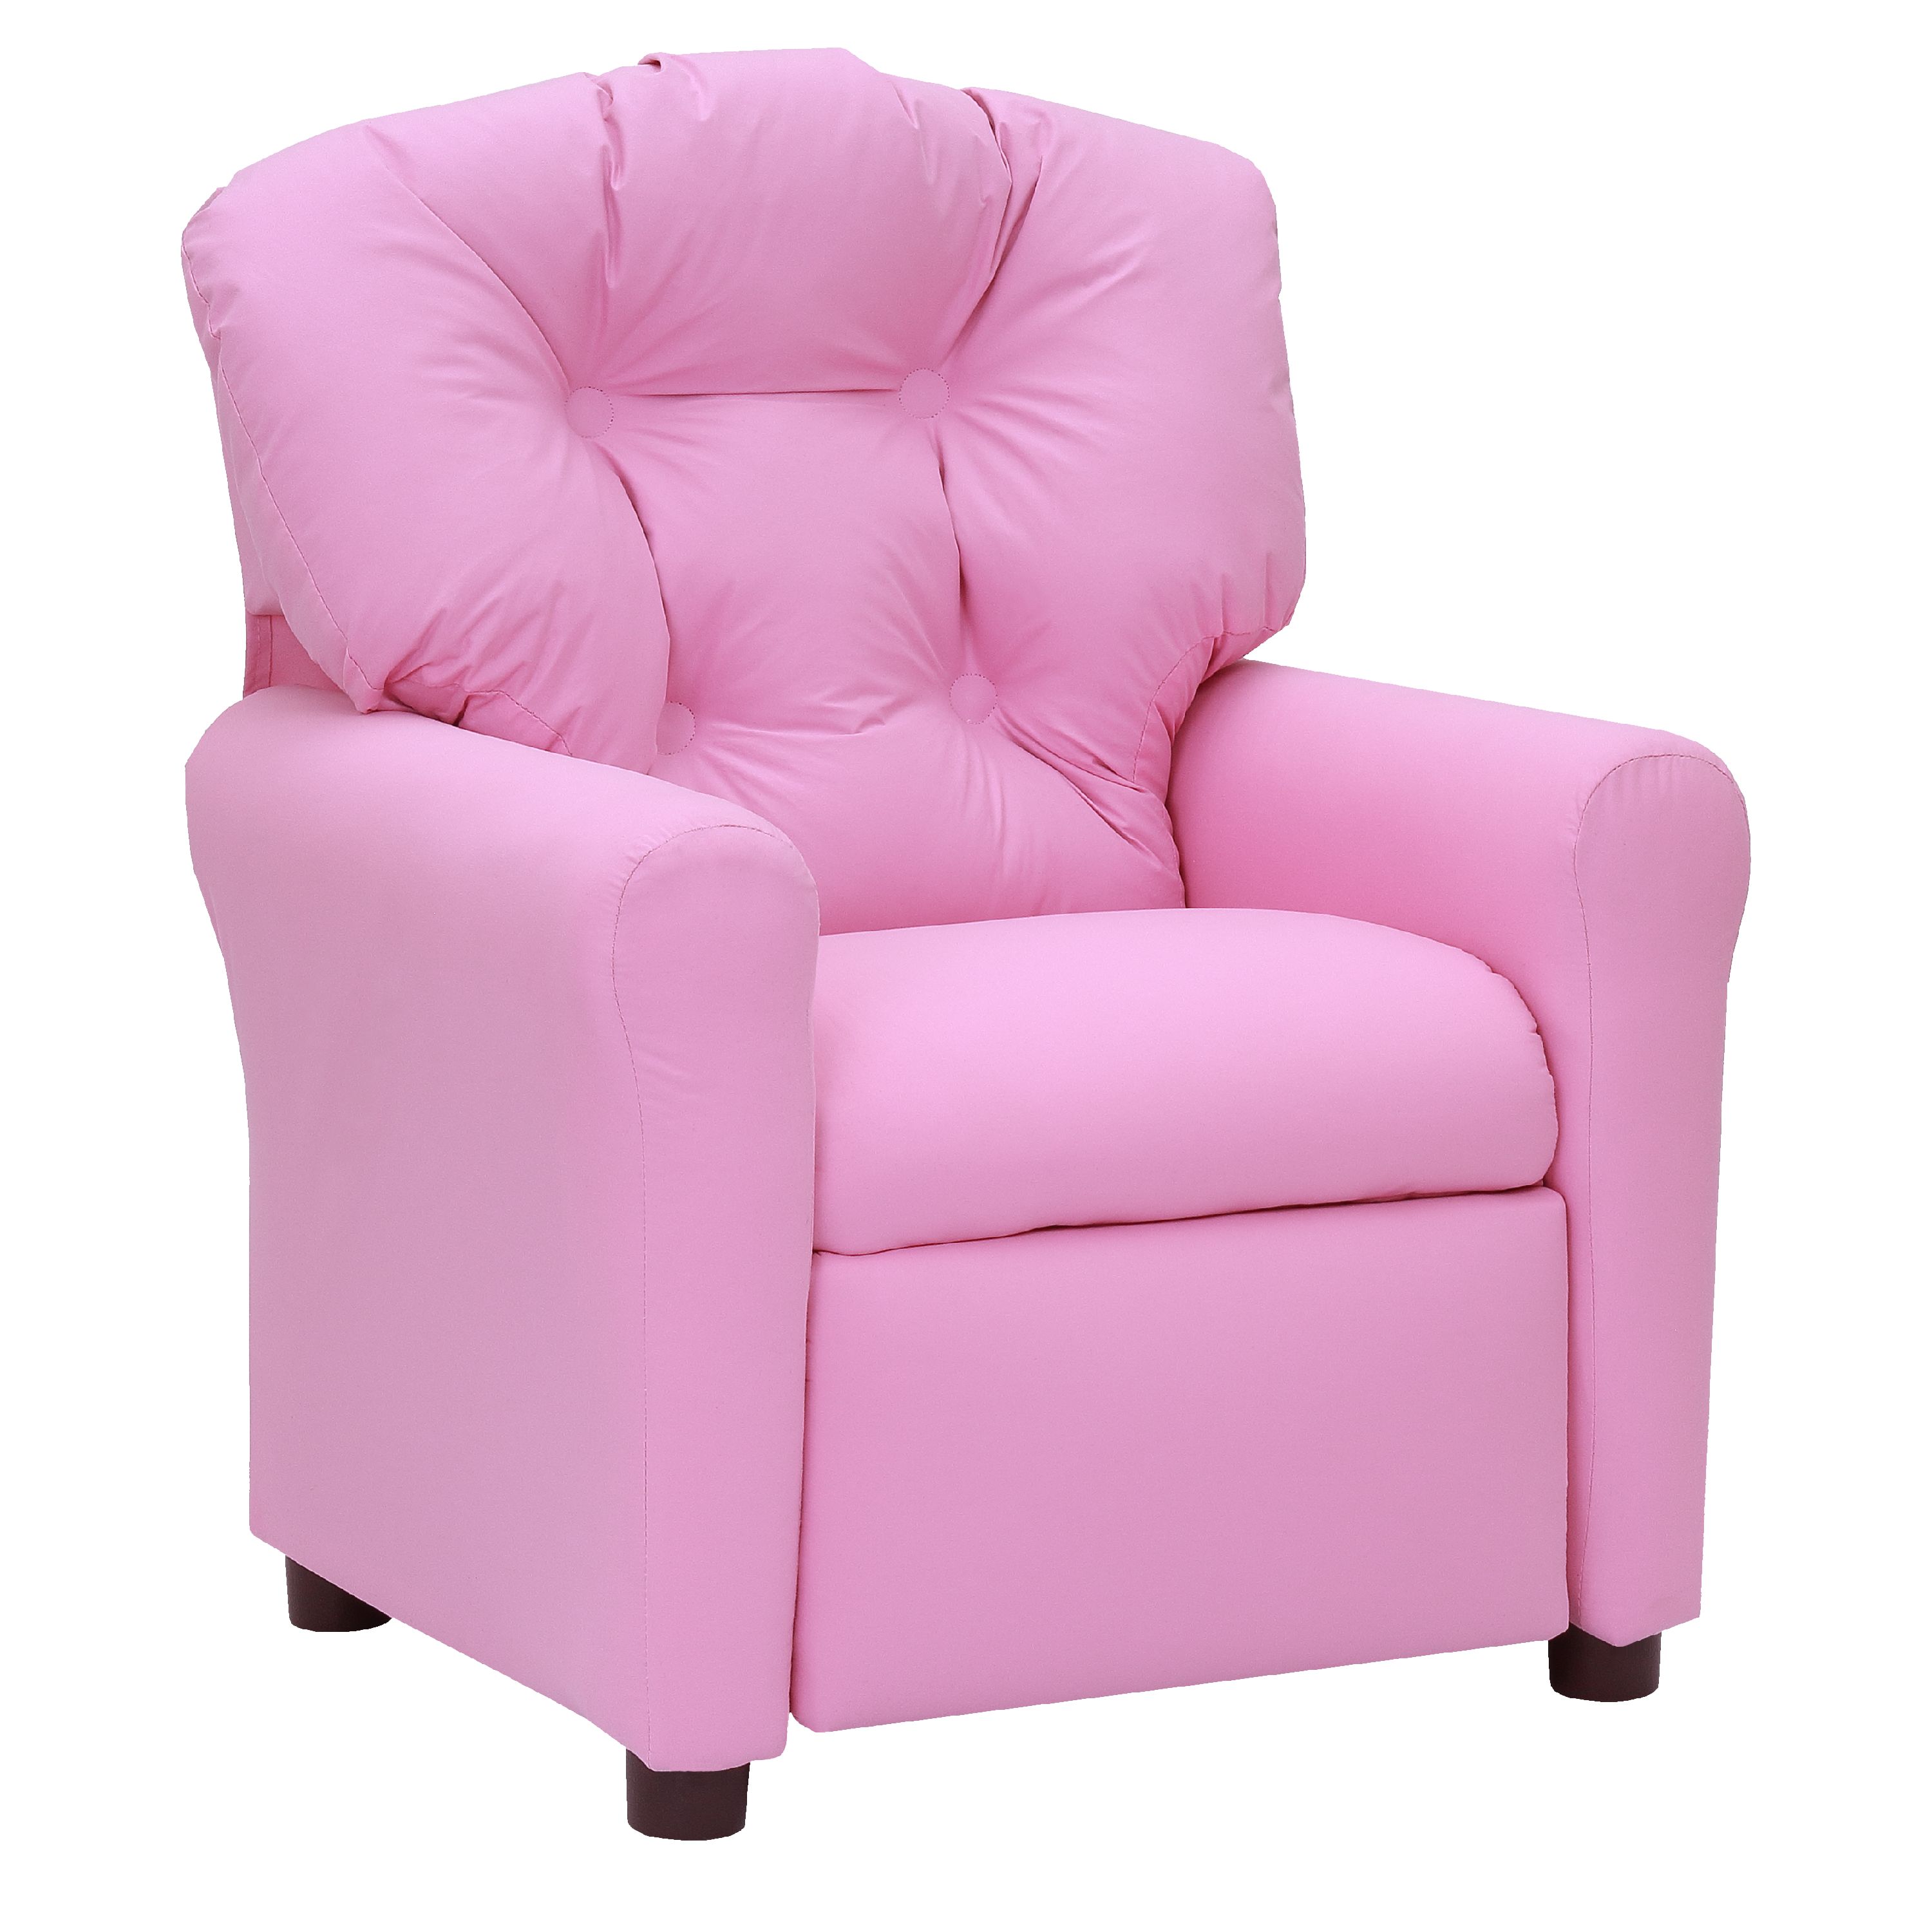 Crew Traditional Kids Recliner Chair, Multiple Colors - image 1 of 9